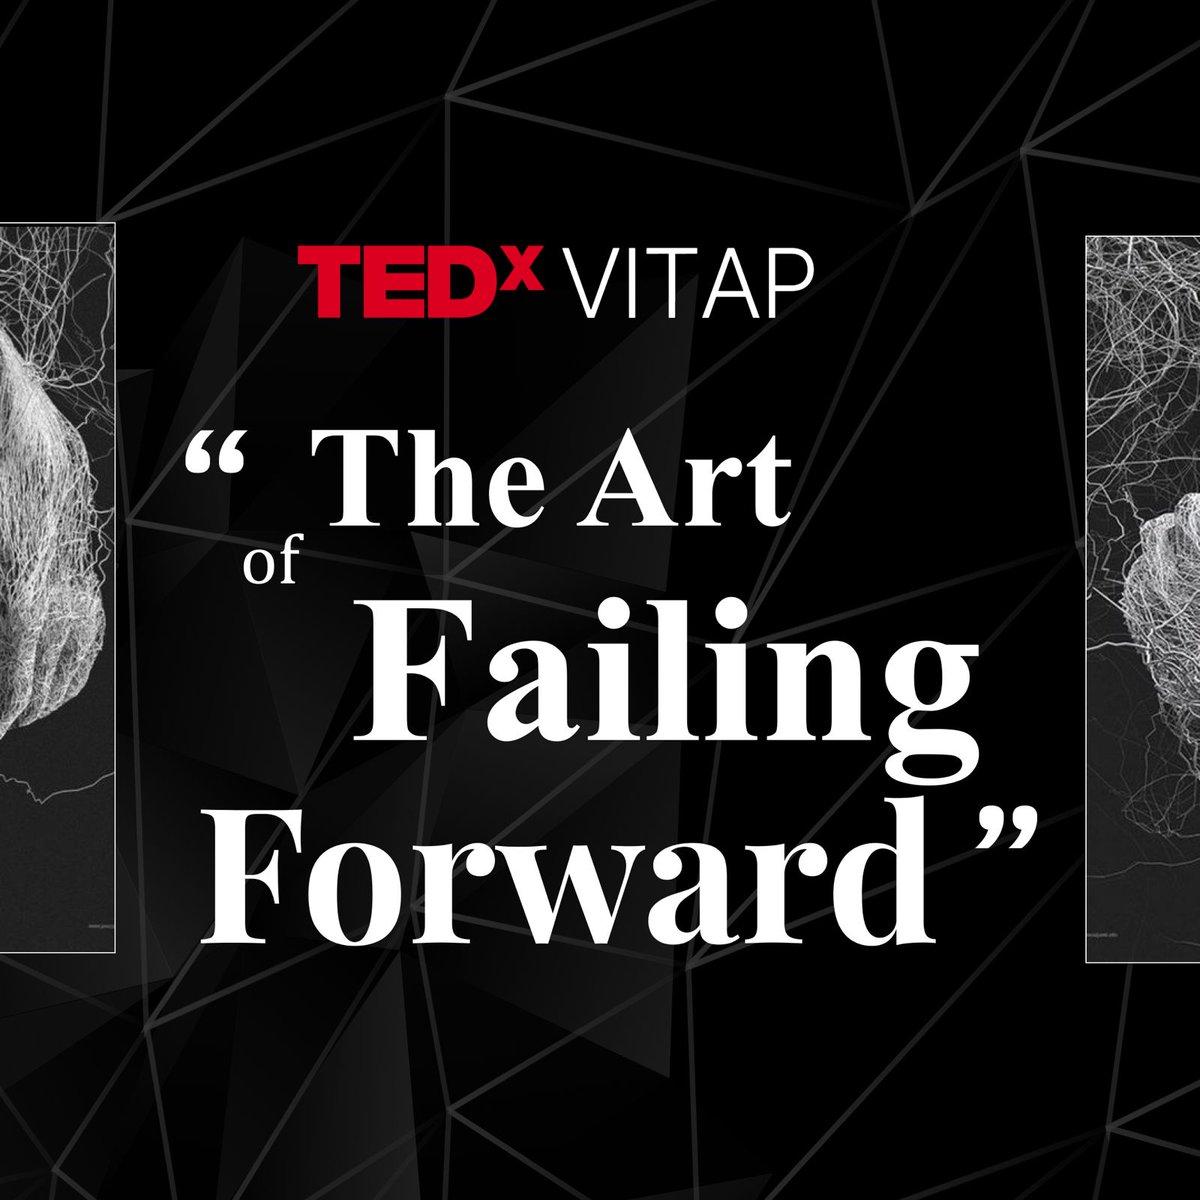 Book your ticket now! tedxvitap.com